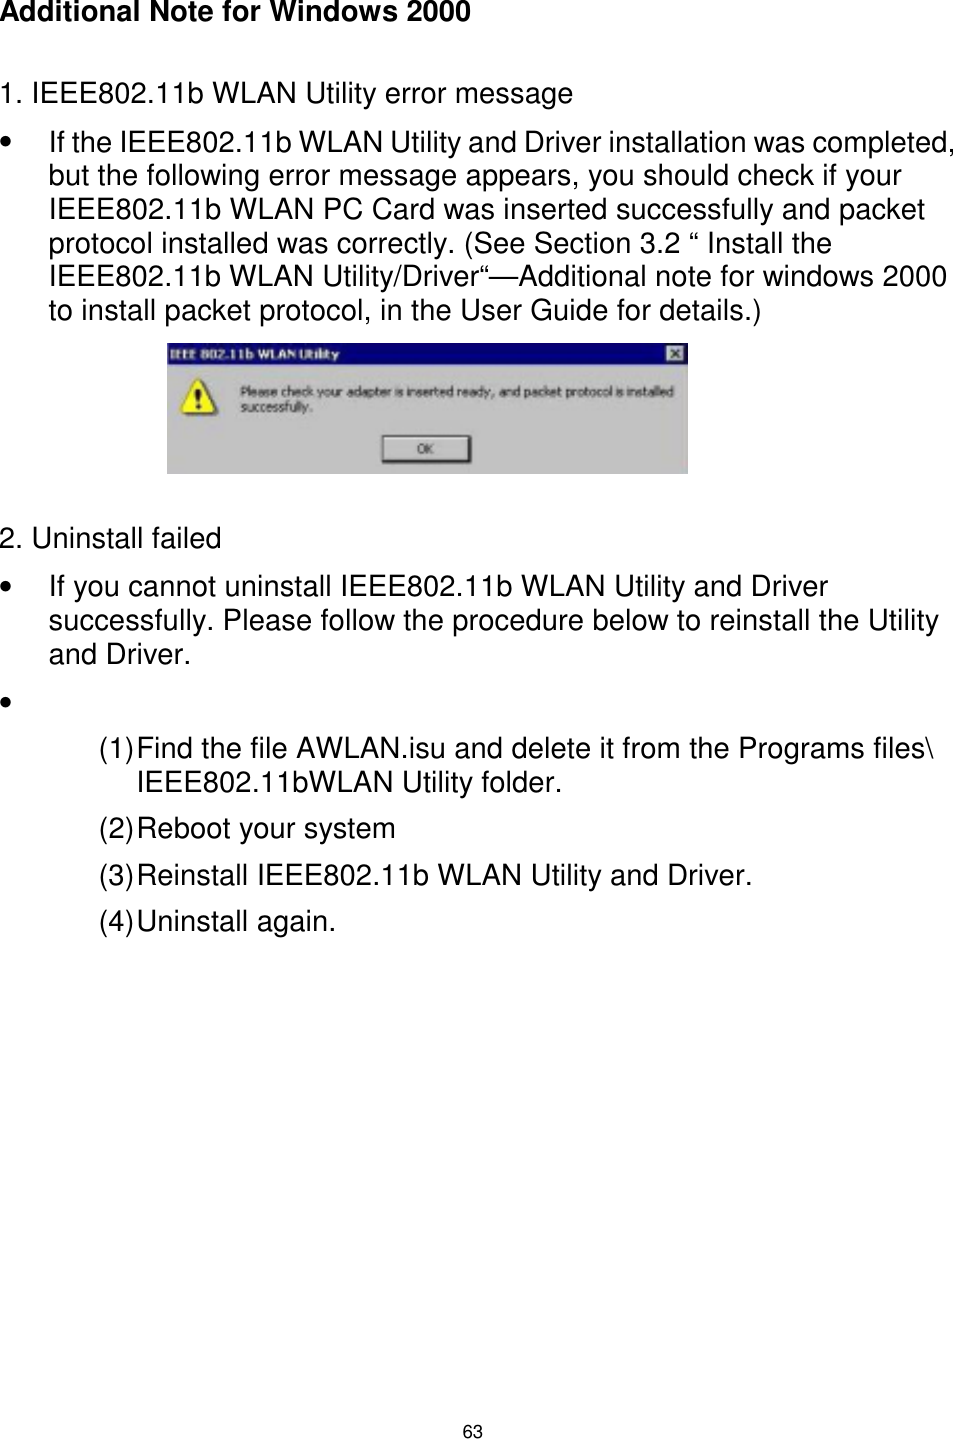  63  Additional Note for Windows 2000  1. IEEE802.11b WLAN Utility error message •  If the IEEE802.11b WLAN Utility and Driver installation was completed, but the following error message appears, you should check if your IEEE802.11b WLAN PC Card was inserted successfully and packet protocol installed was correctly. (See Section 3.2 “ Install the IEEE802.11b WLAN Utility/Driver“—Additional note for windows 2000 to install packet protocol, in the User Guide for details.)      2. Uninstall failed •  If you cannot uninstall IEEE802.11b WLAN Utility and Driver successfully. Please follow the procedure below to reinstall the Utility and Driver. •   (1) Find the file AWLAN.isu and delete it from the Programs files\ IEEE802.11bWLAN Utility folder. (2) Reboot your system (3) Reinstall IEEE802.11b WLAN Utility and Driver. (4) Uninstall  again. 